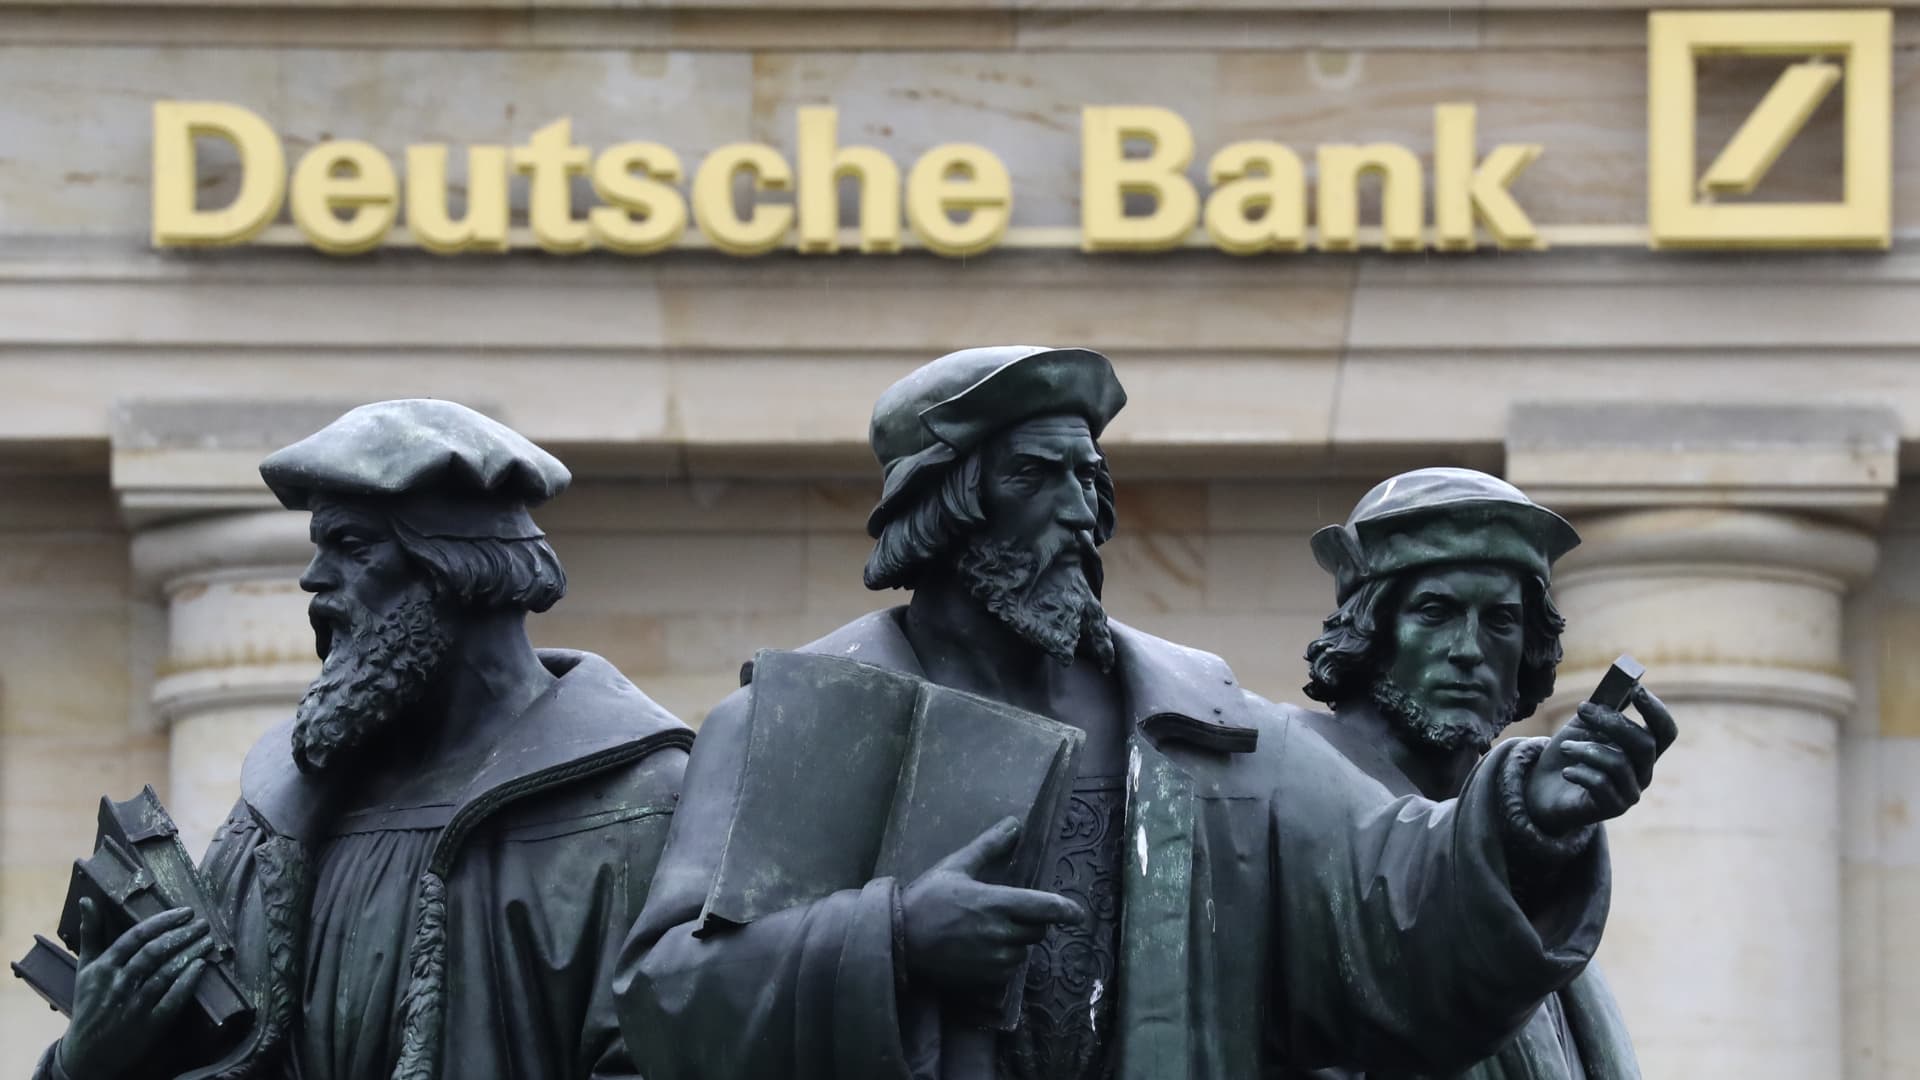 Deutsche Bank exceeds expectations to deliver a profit for the eighth quarter in a row